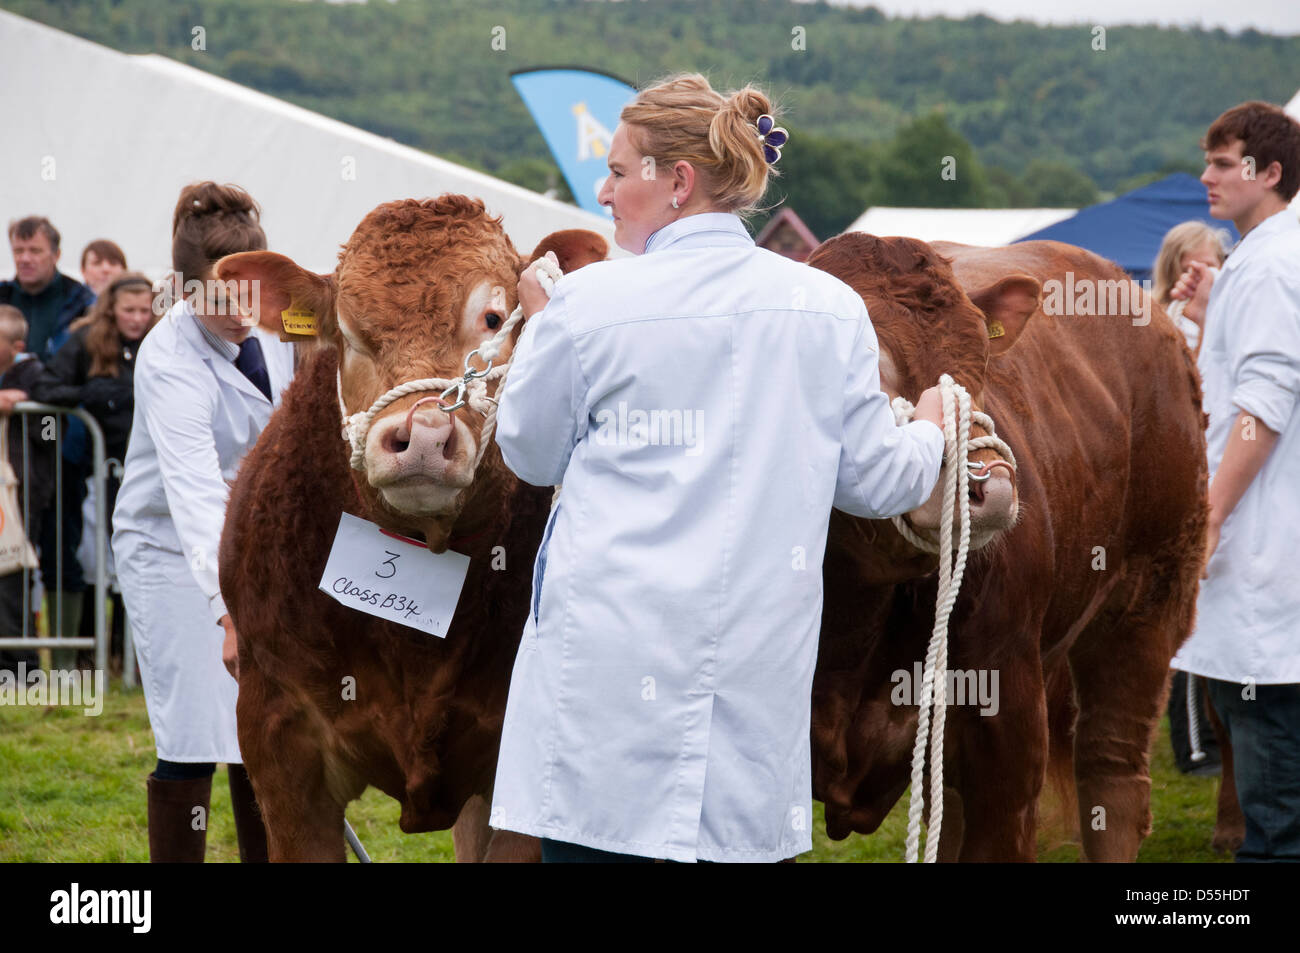 Pair of limousin cattle competitors (bulls) with handler standing in parade ring - Kilnsey Agricultural Show showground, Yorkshire Dales, England, UK. Stock Photo